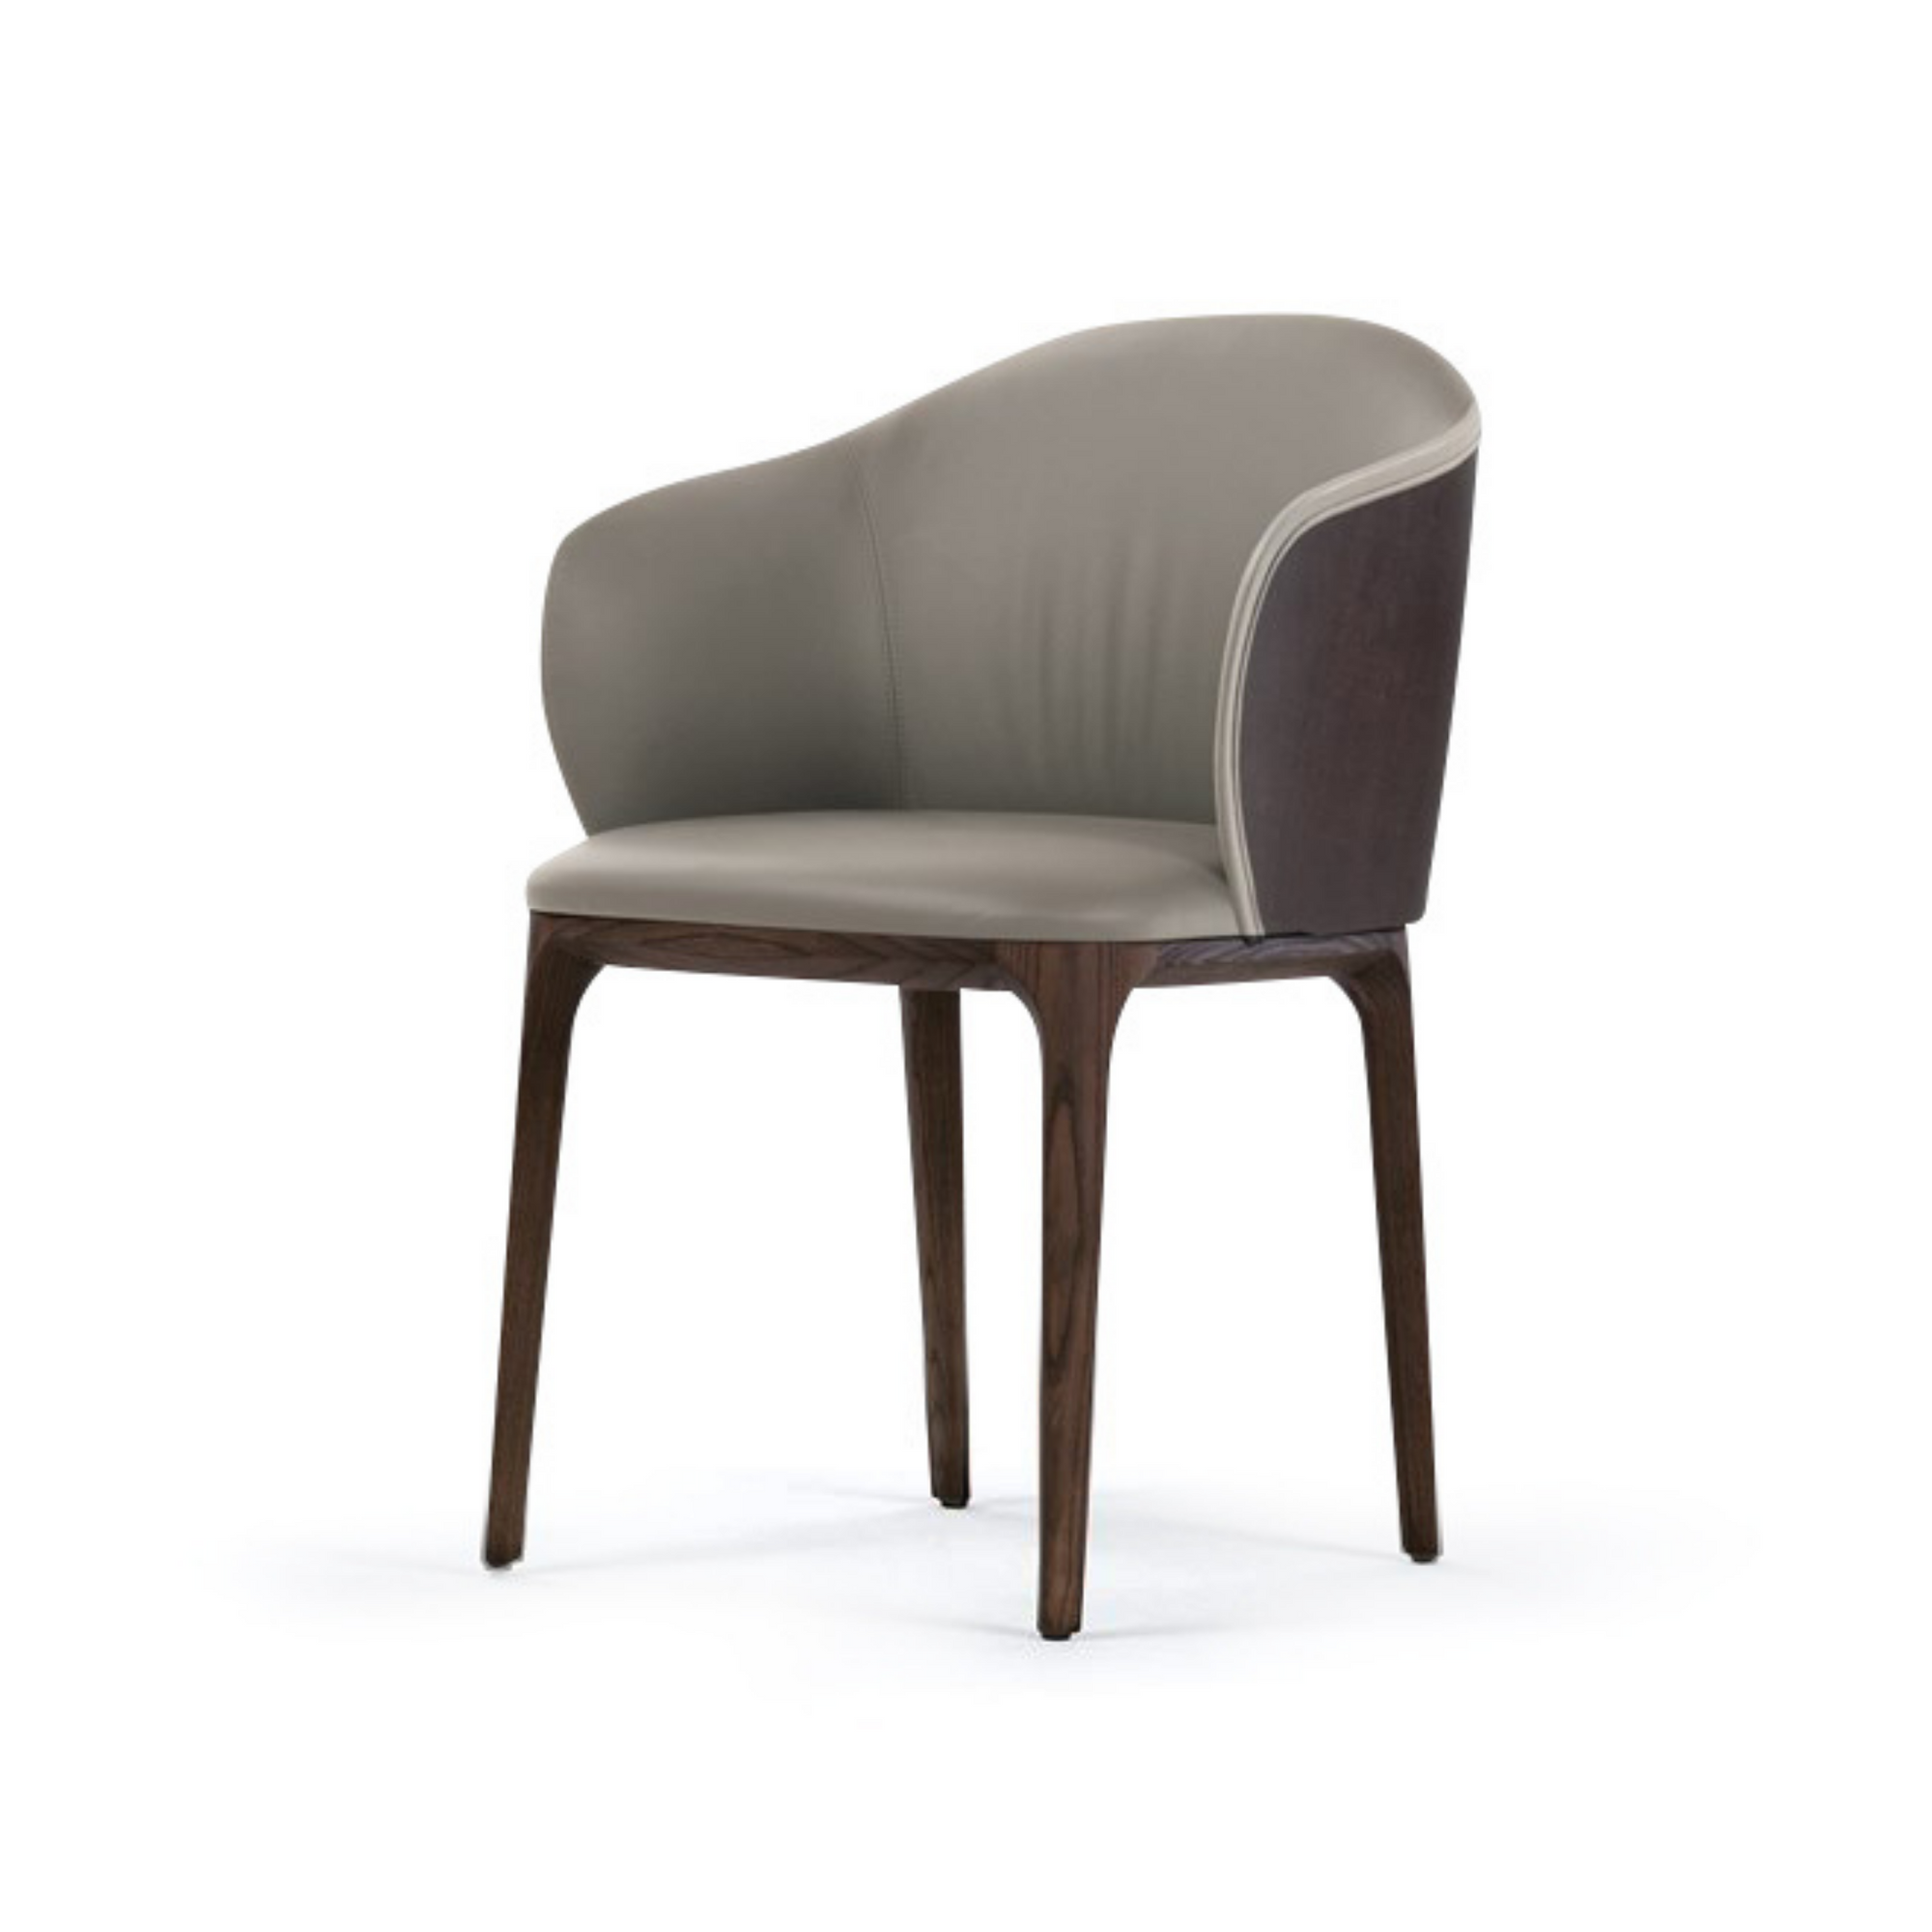 Manda Wood armchair makes its tribute to the essence of wood: a noble, warm and natural material.